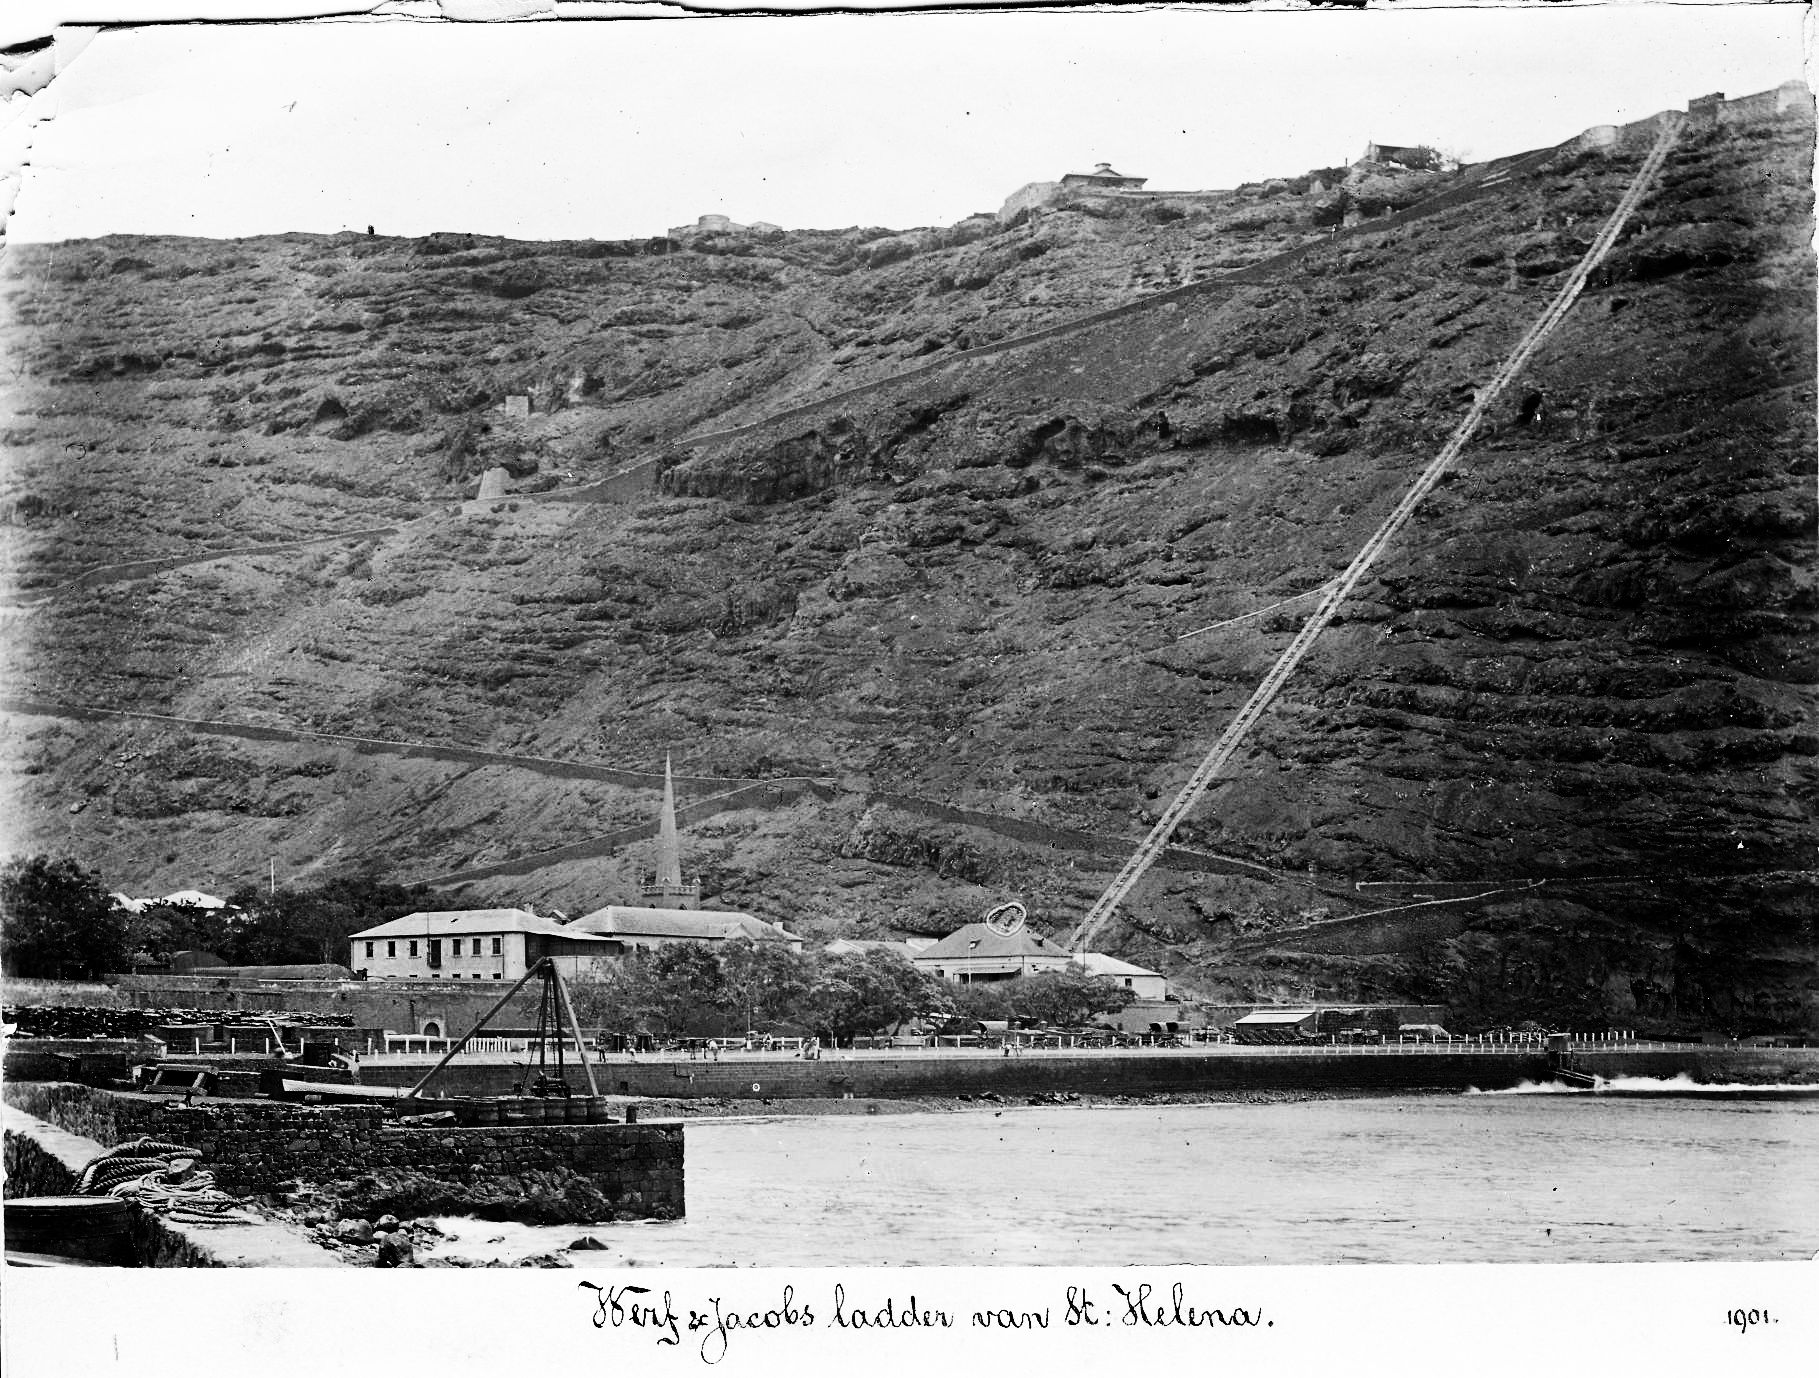 Wharf and Jacobs ladder(1901)